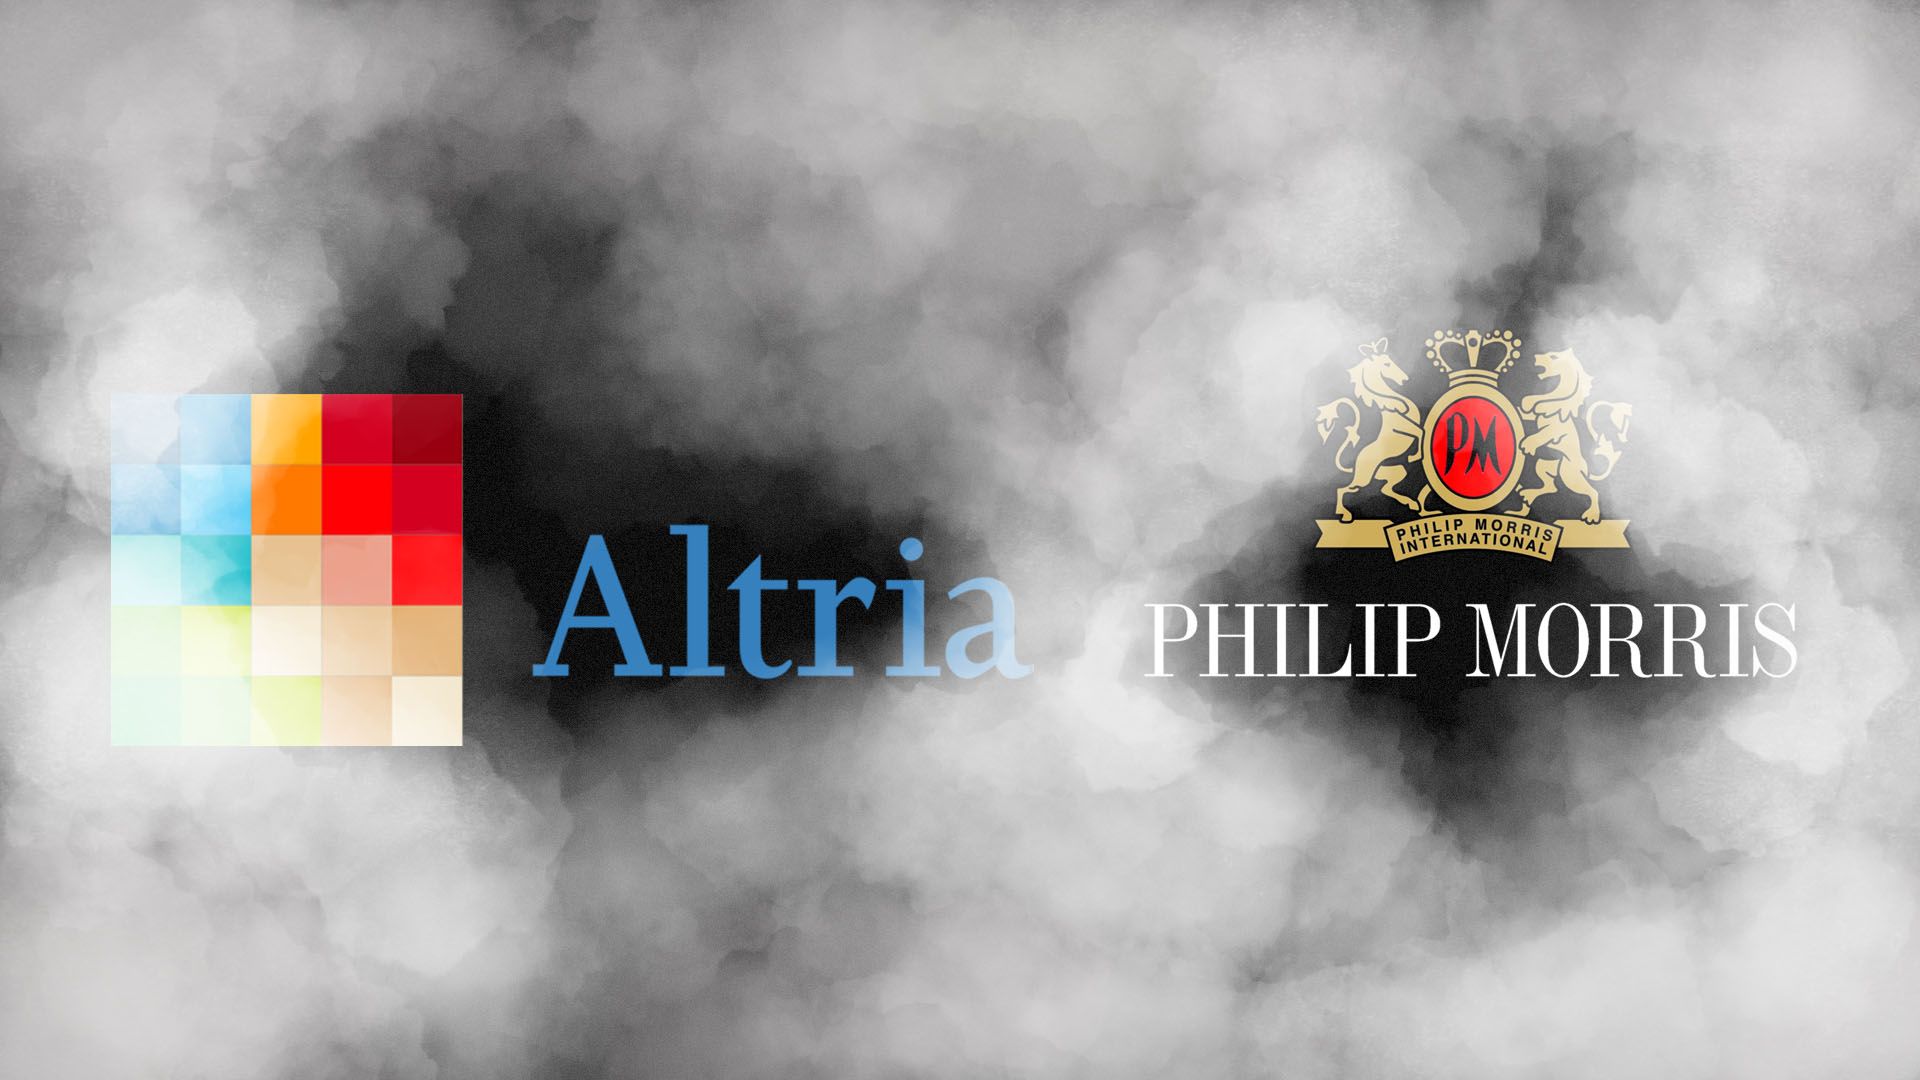 Illustration of the Phillip Morris and Altria logos lost in plume of vape smoke.